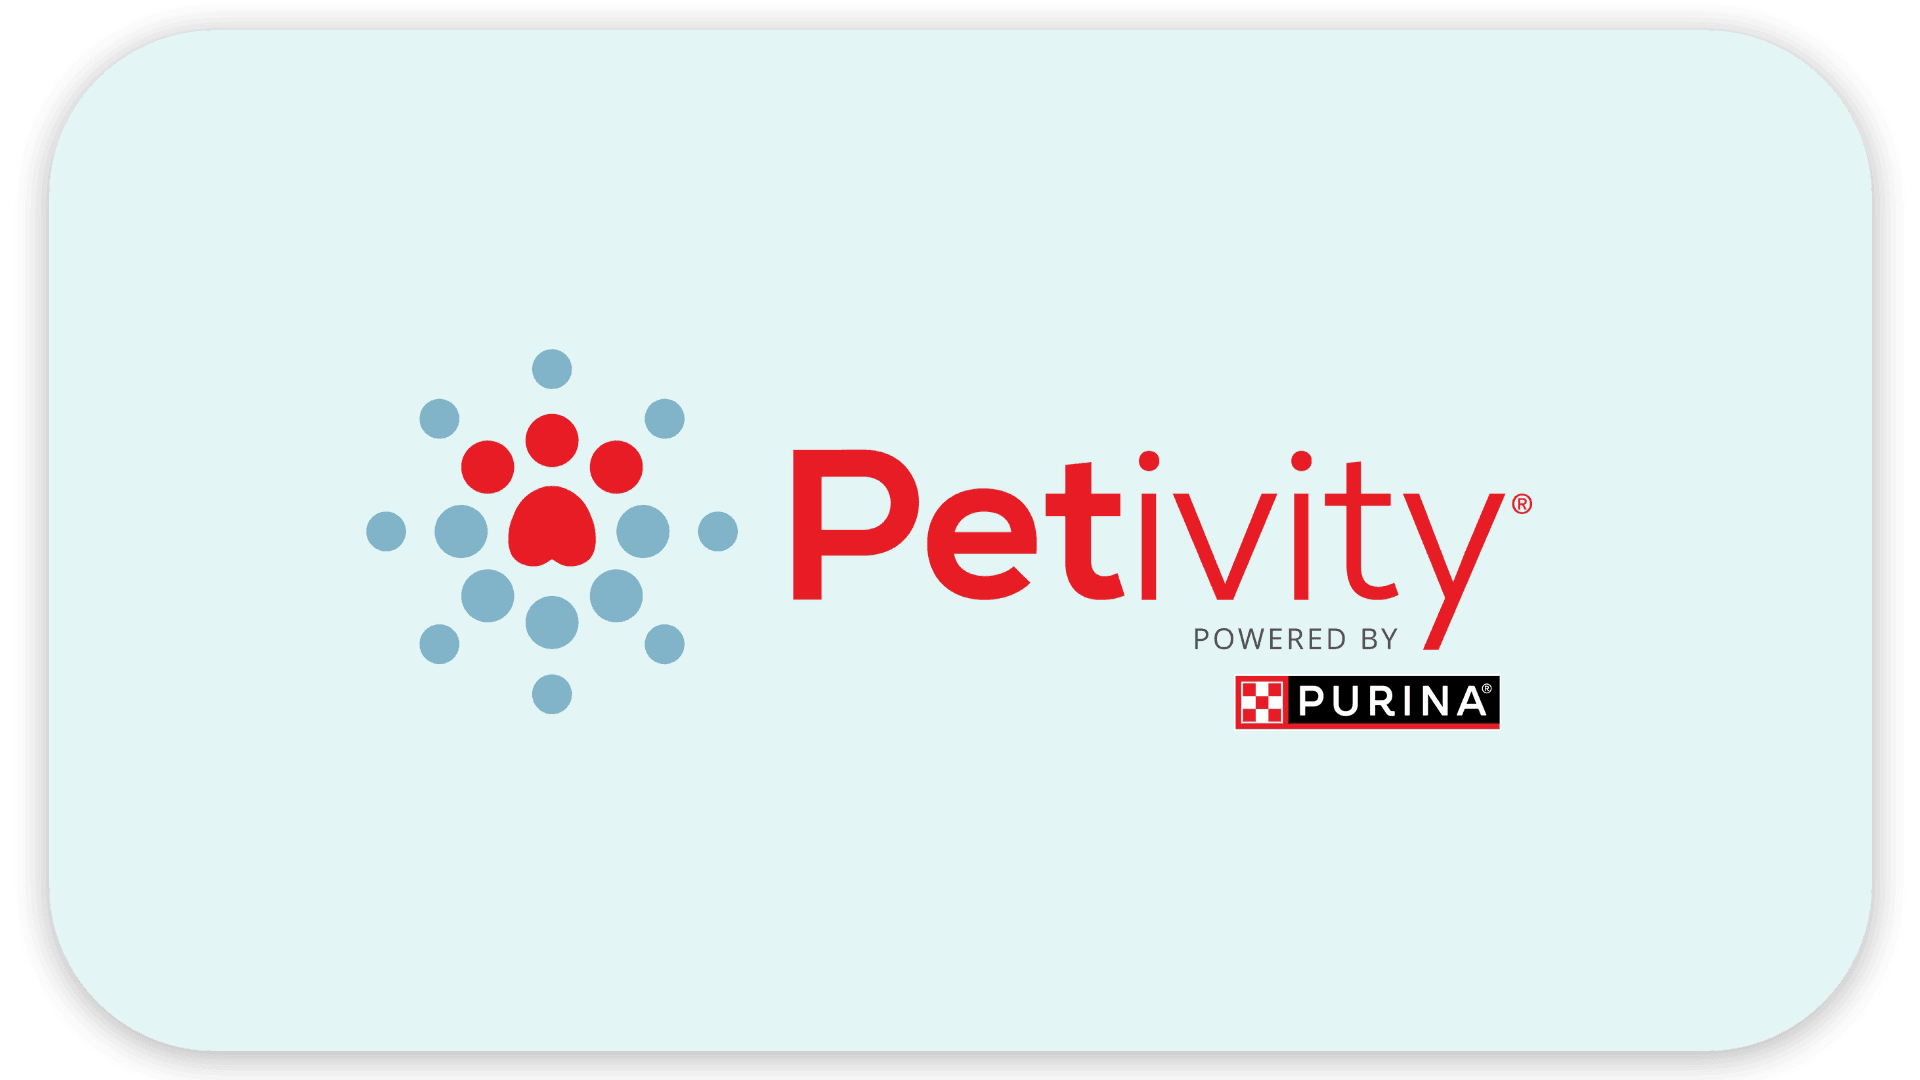 Petivity logo featuring a red paw print surrounded by blue dots.